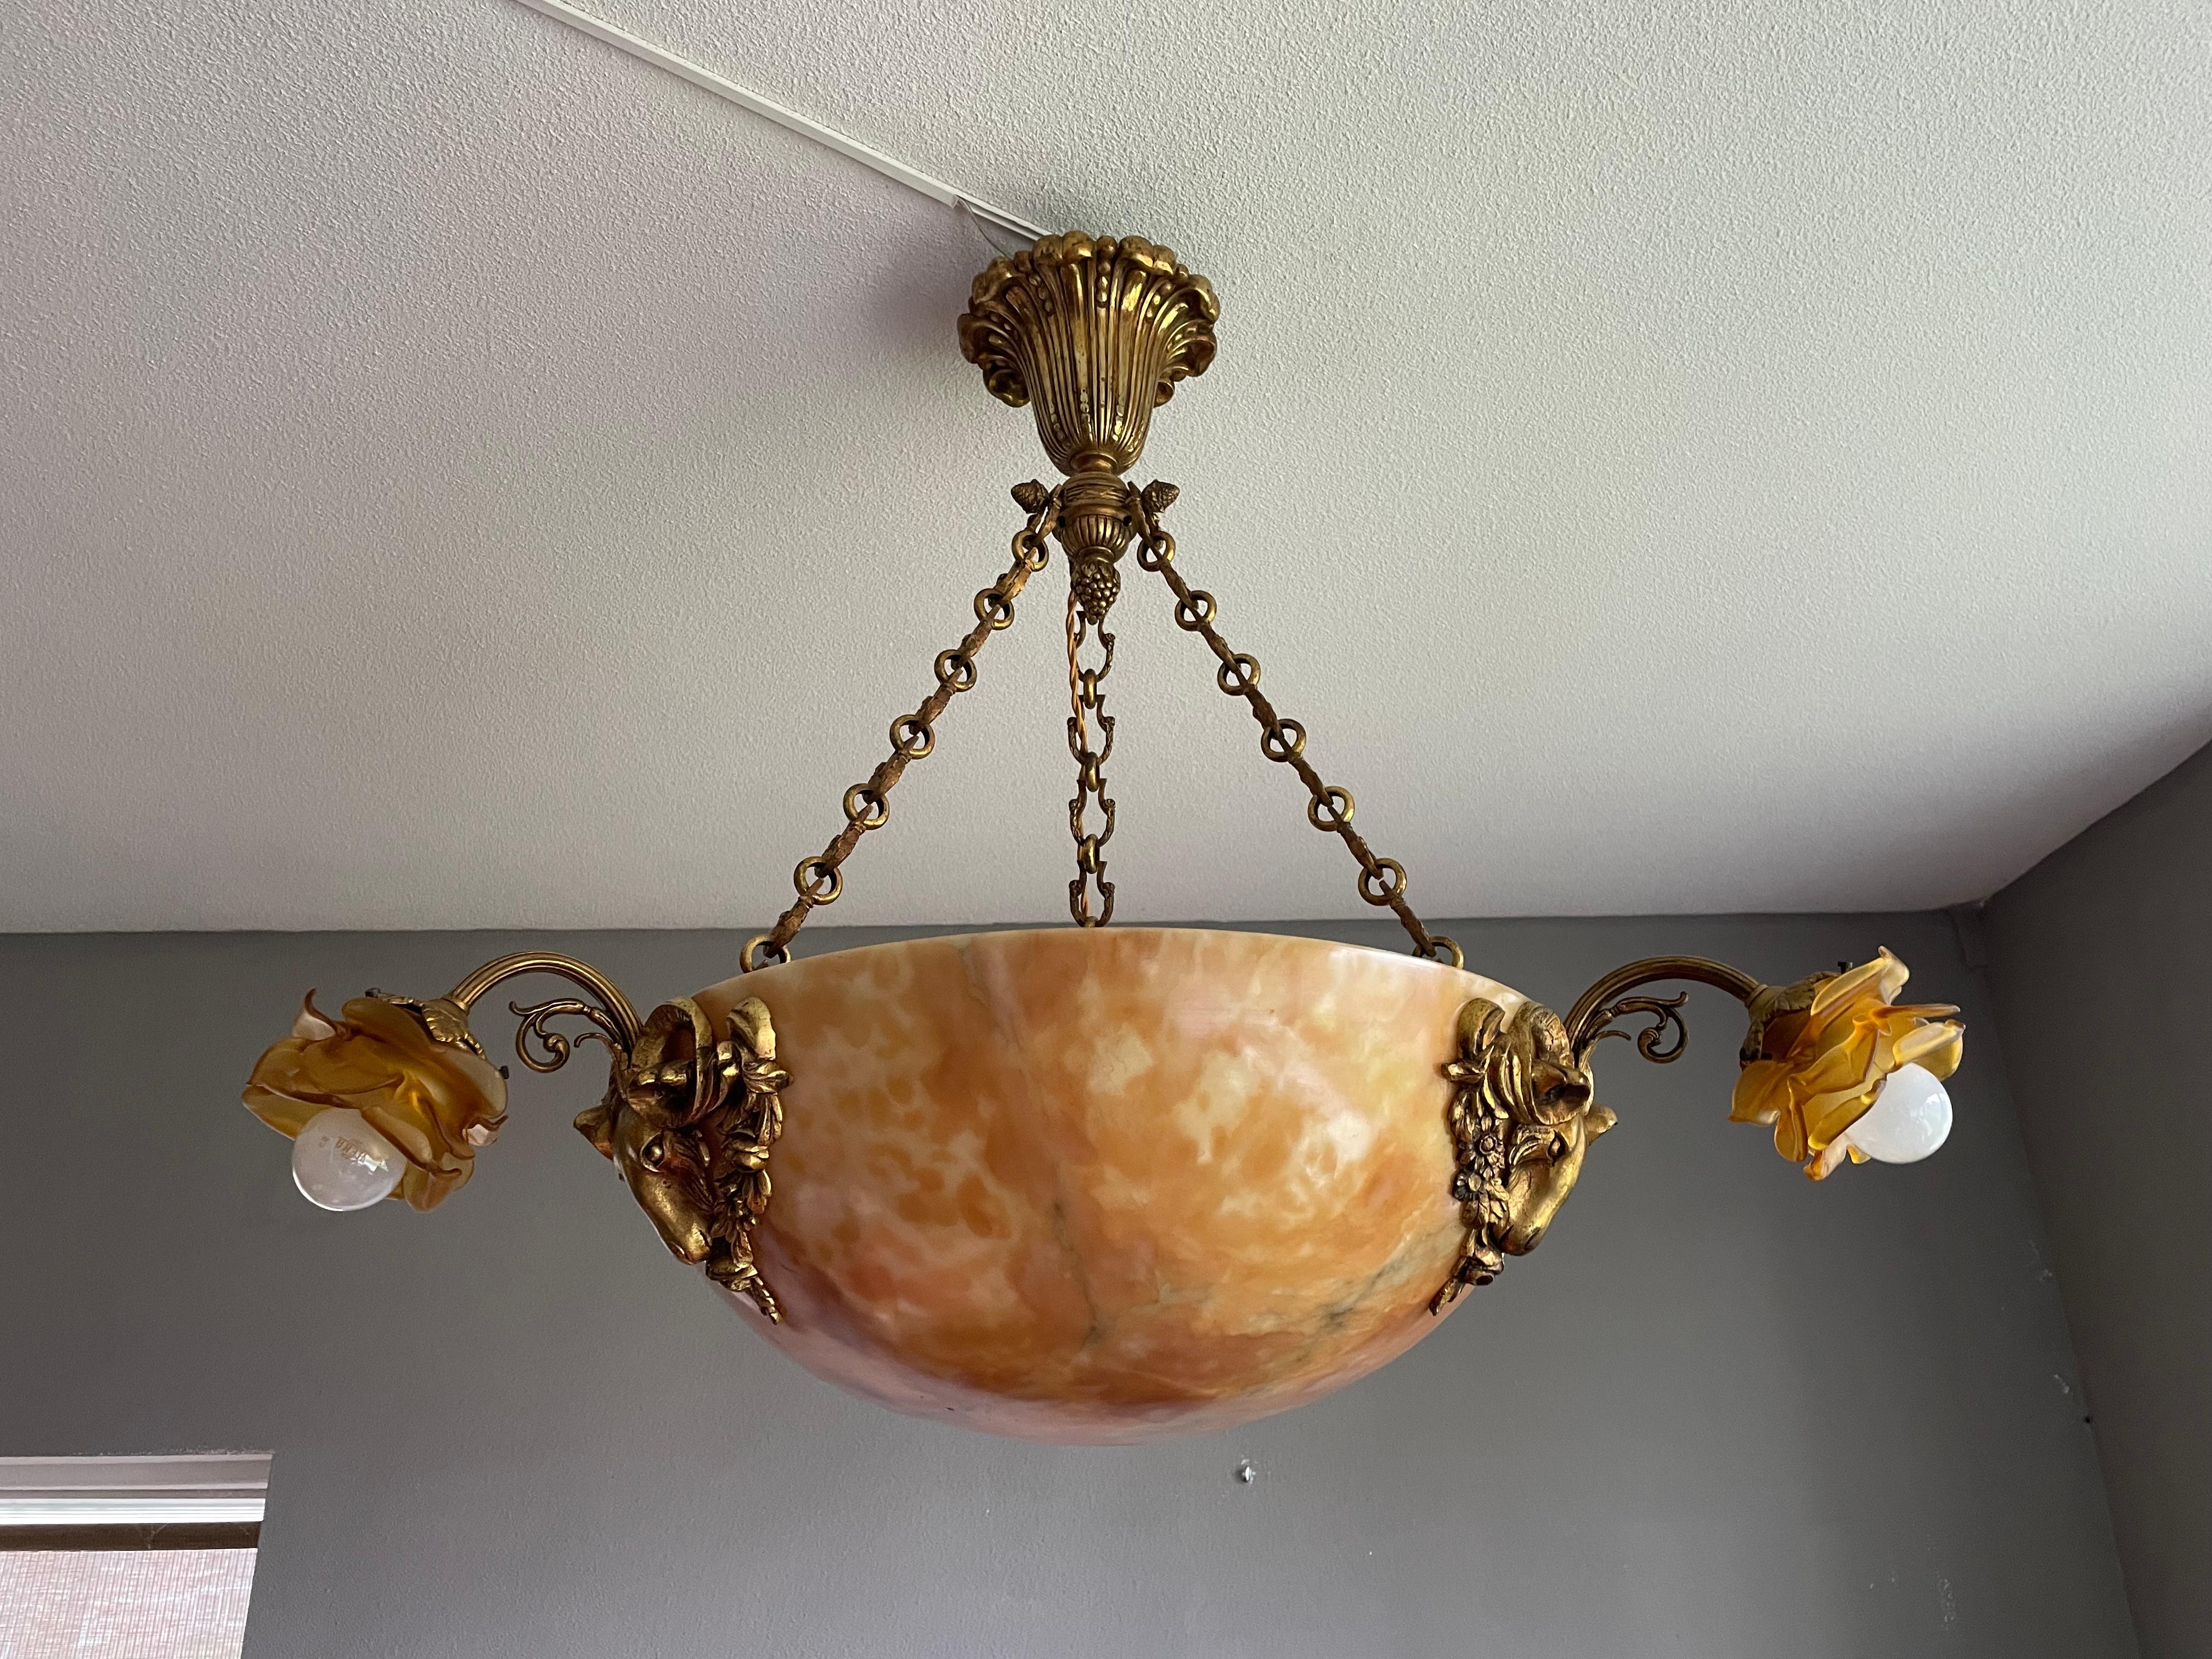 Majestic antique pendant with a stunning, 20 inch alabaster shade and two sets of glass shades.

Thanks to its unique design, its impressive size and its truly excellent condition this six-light alabaster chandelier will light up both your days and